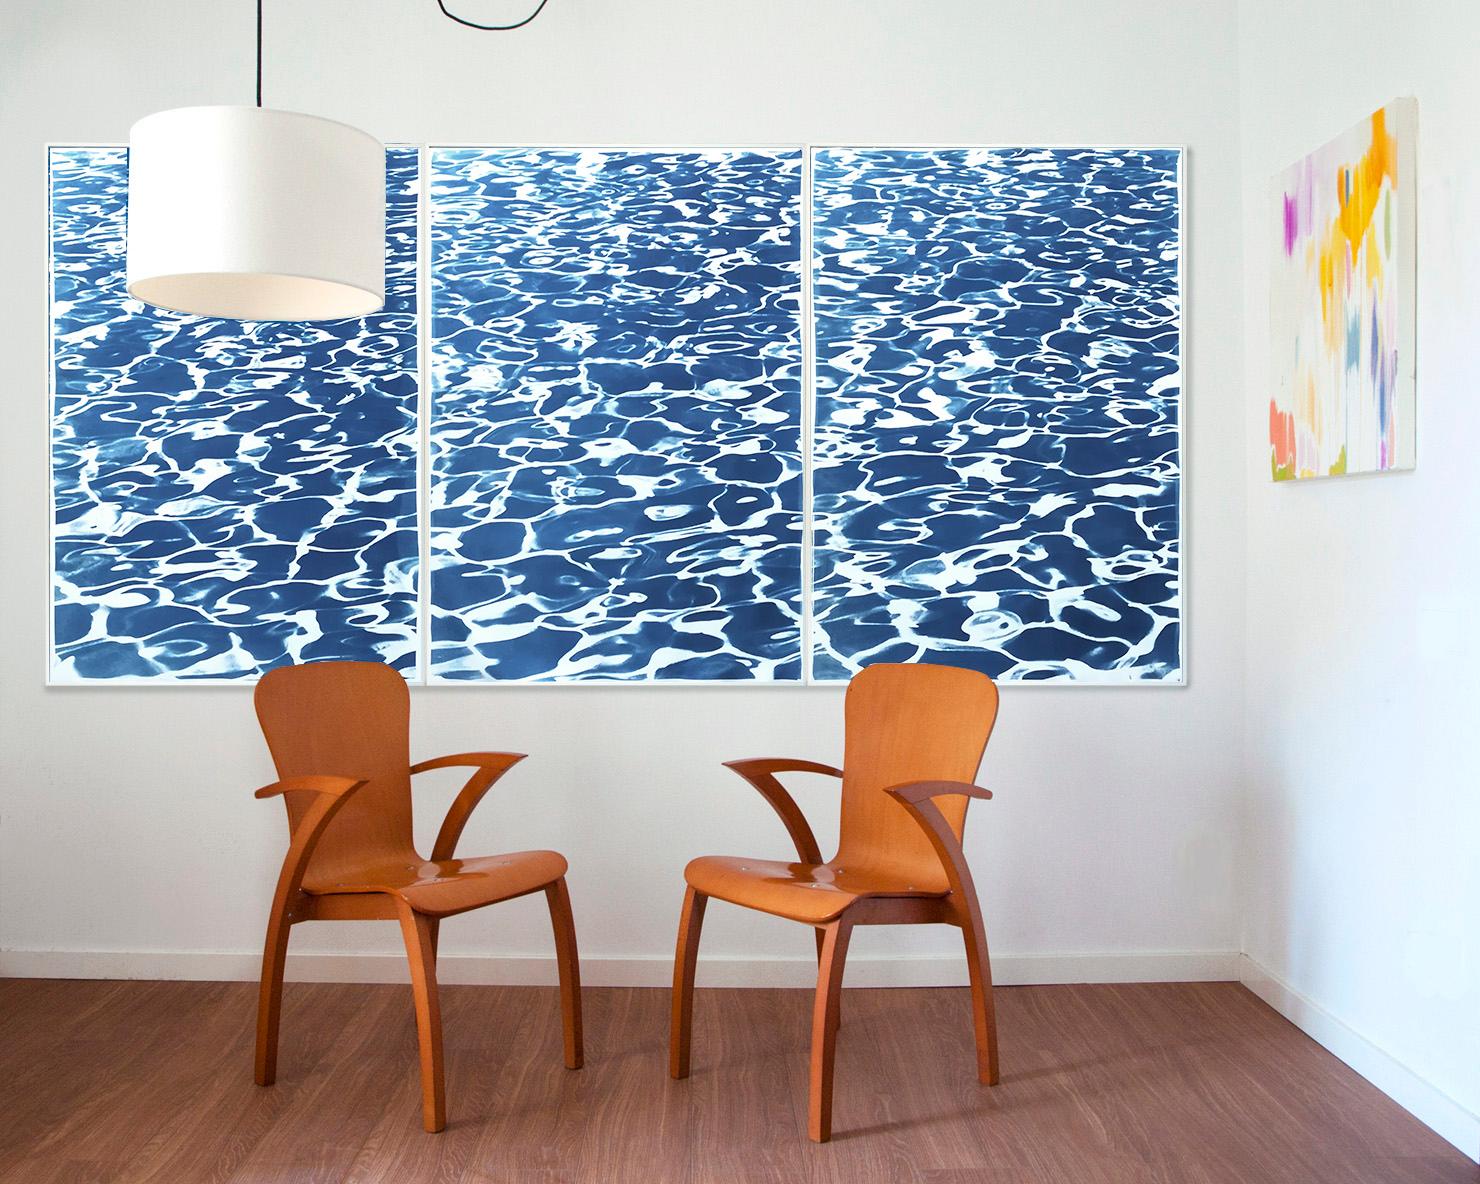 Pool Patterns, Nautical Abstract Seascape Triptych, Blue Cyanotype Print For Sale 1